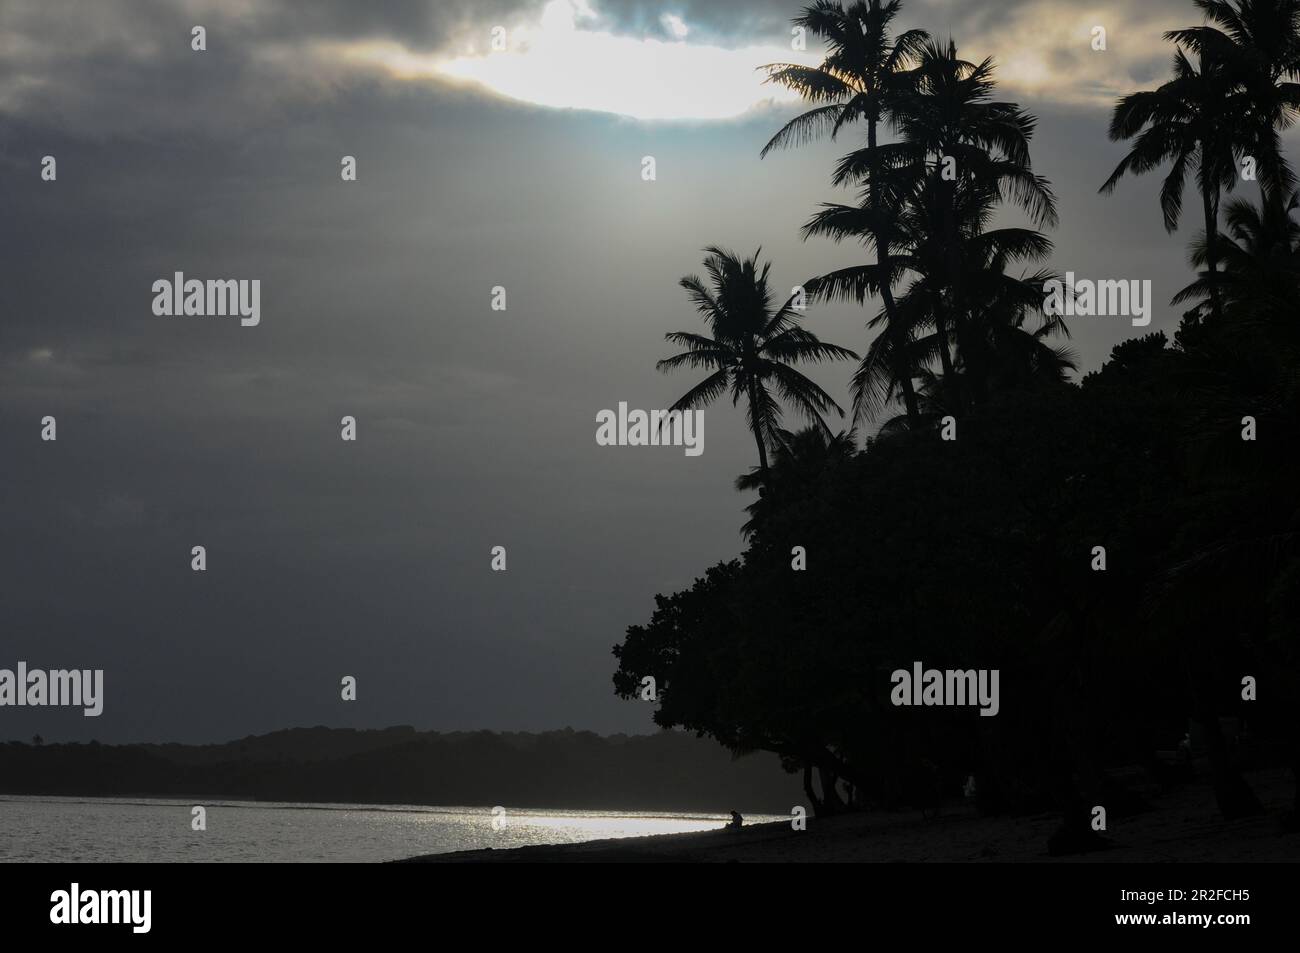 View of palm trees and the Pacific before the tropical rain with dramatic light, Savusavu, Fiji Stock Photo